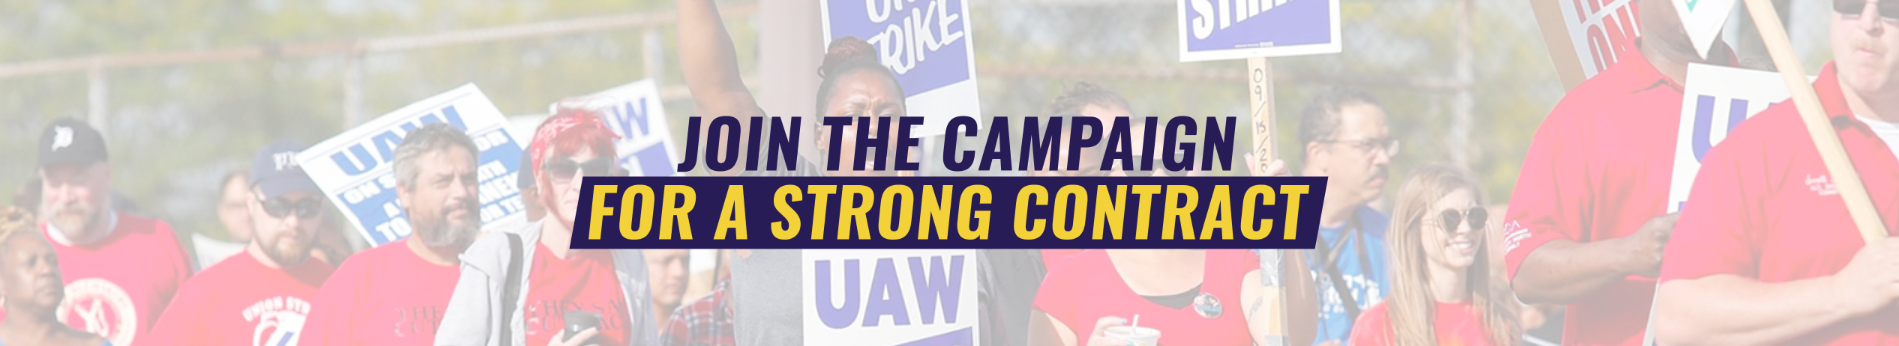 Join the Campaign for a strong Contract